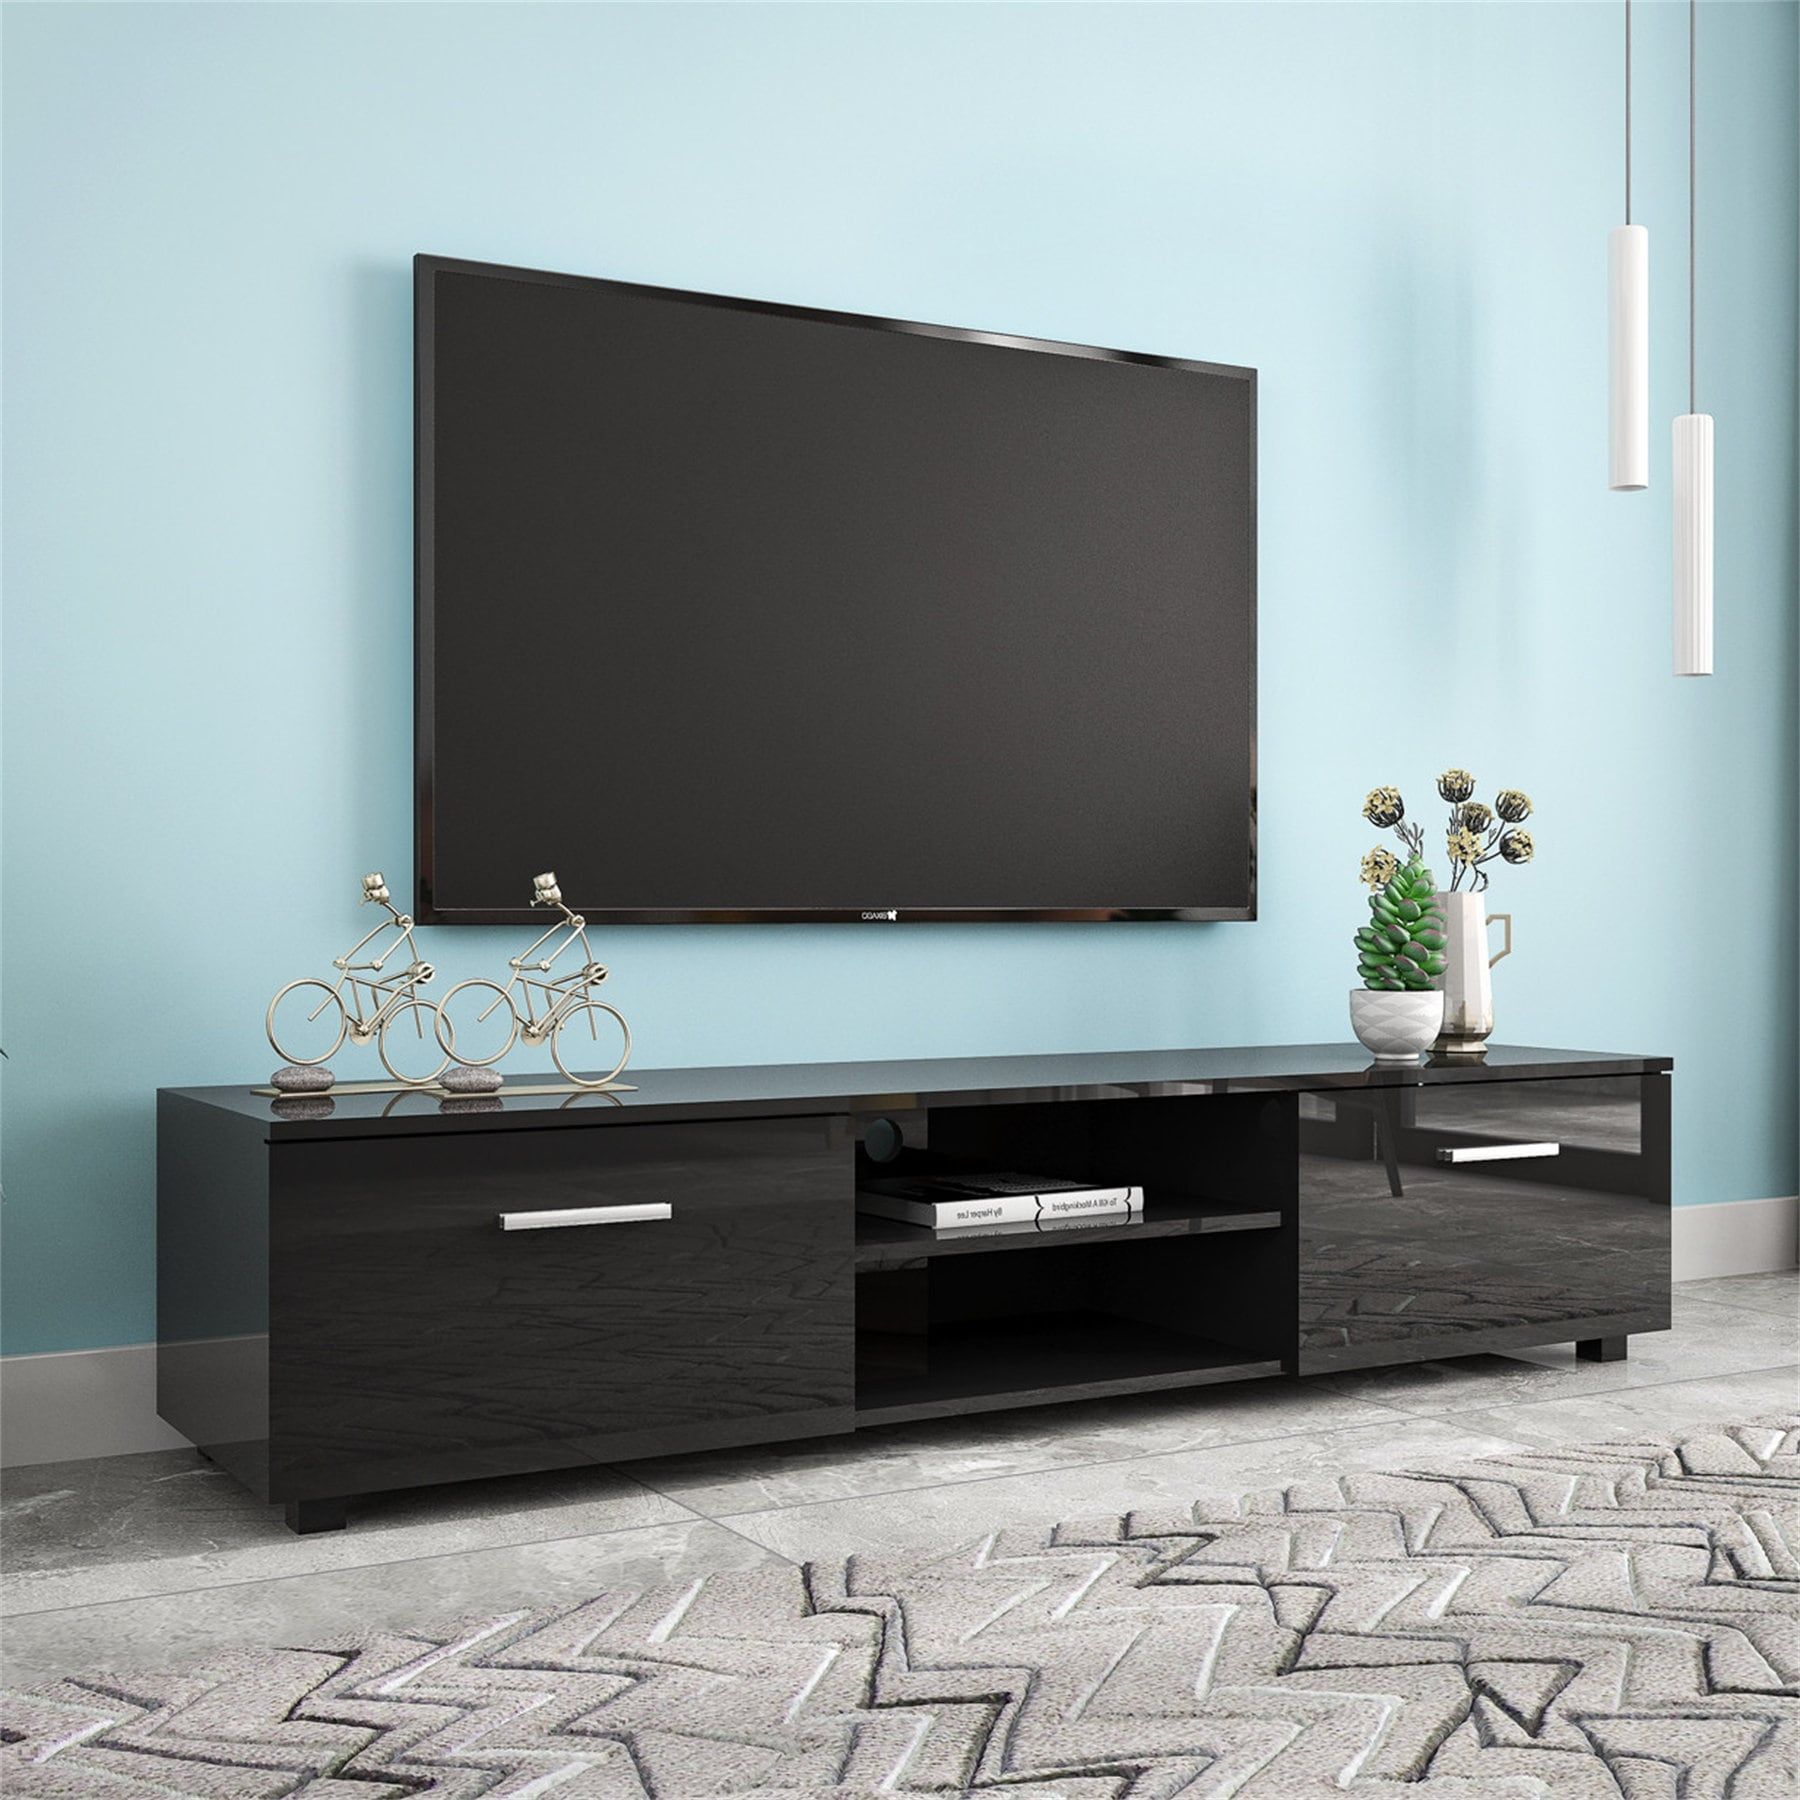 70 Inch Tv Stands With 2 Storage Cabinet & Open Shelves – On Sale – Bed  Bath & Beyond – 33199620 Within Tv Stands With 2 Doors And 2 Open Shelves (View 10 of 15)